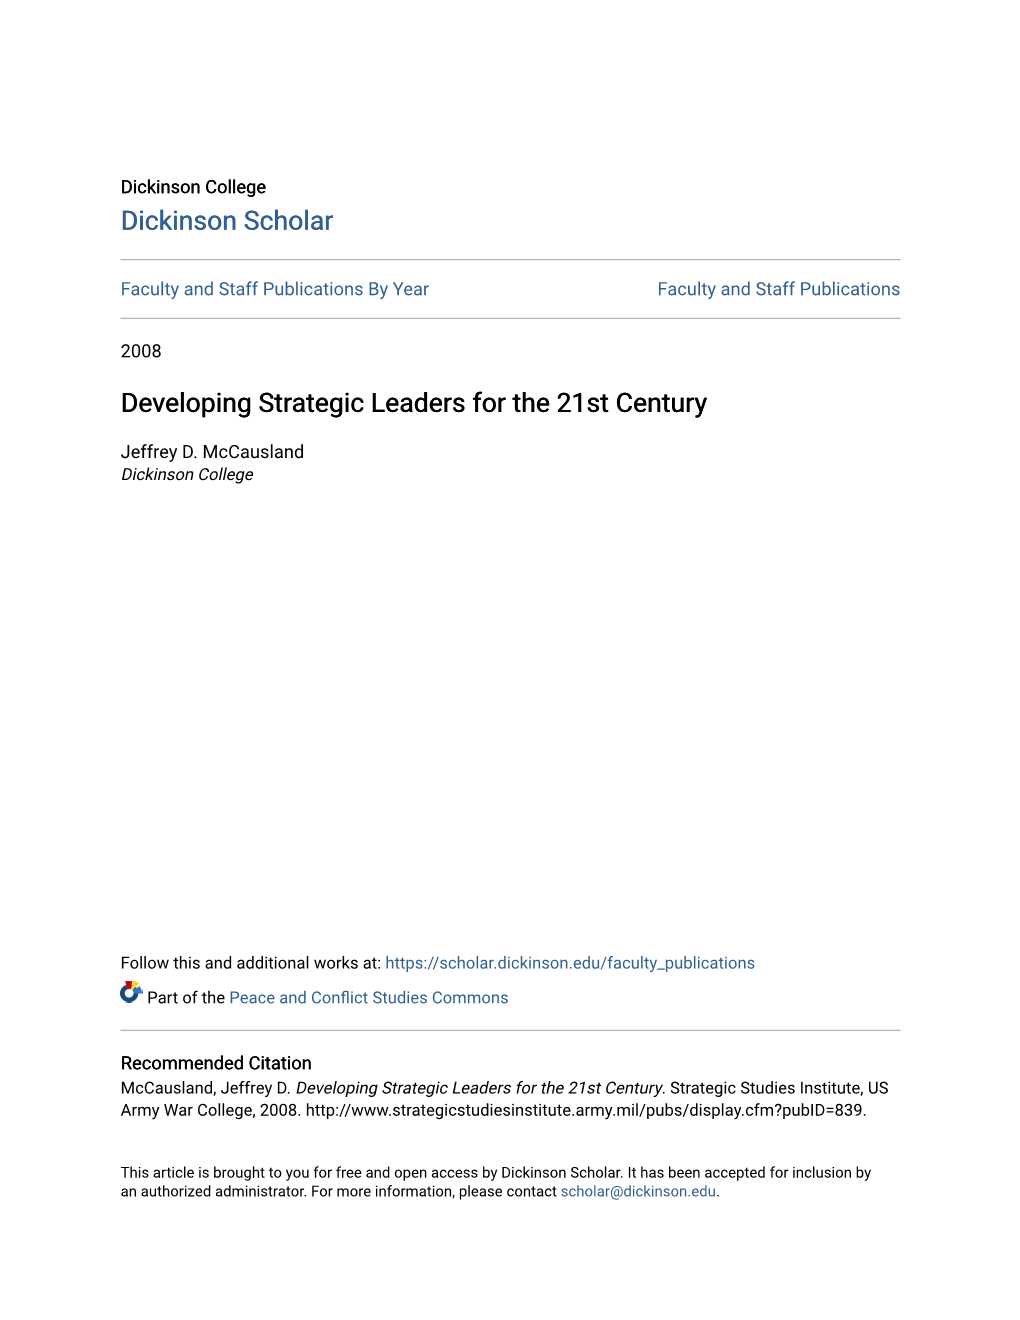 Developing Strategic Leaders for the 21St Century